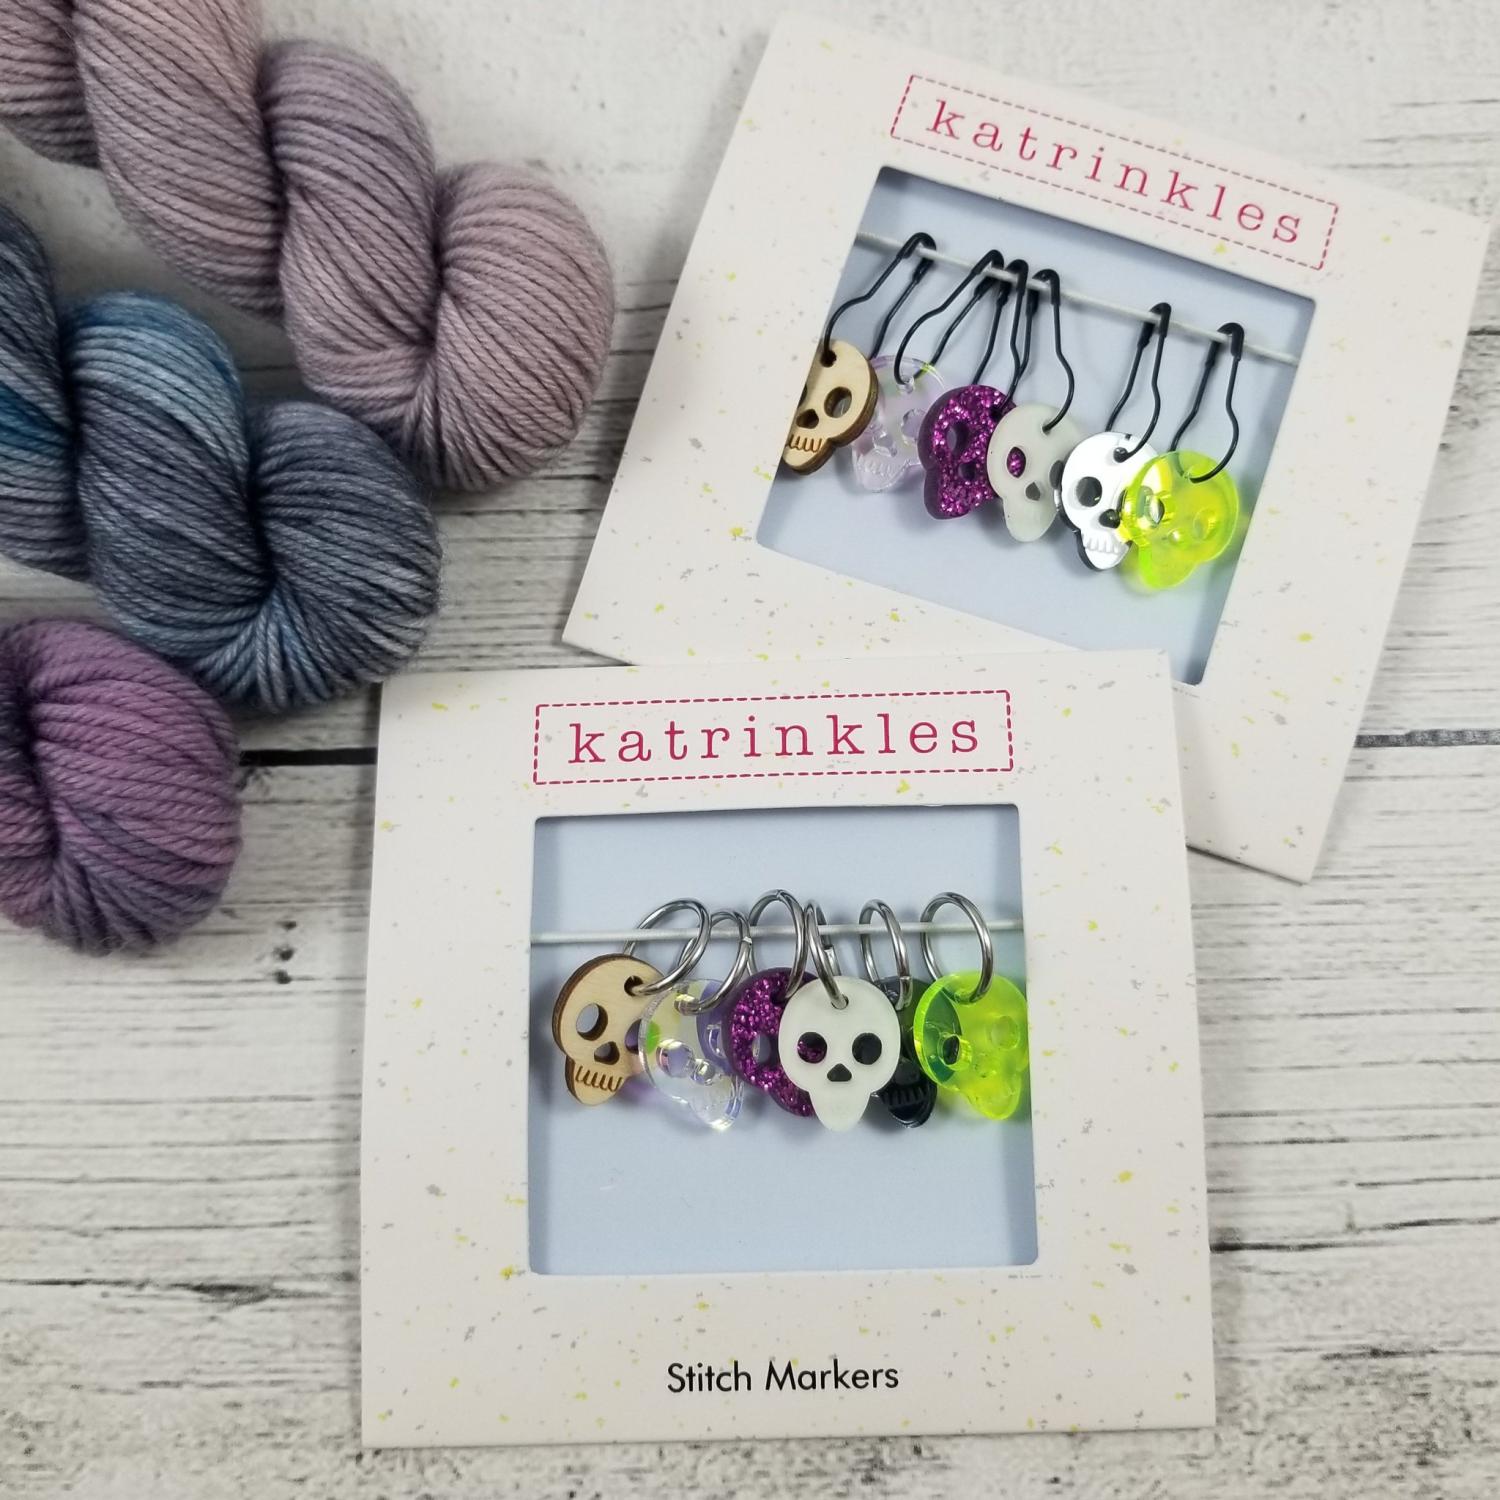 Cat-rinkles Stitch Markers